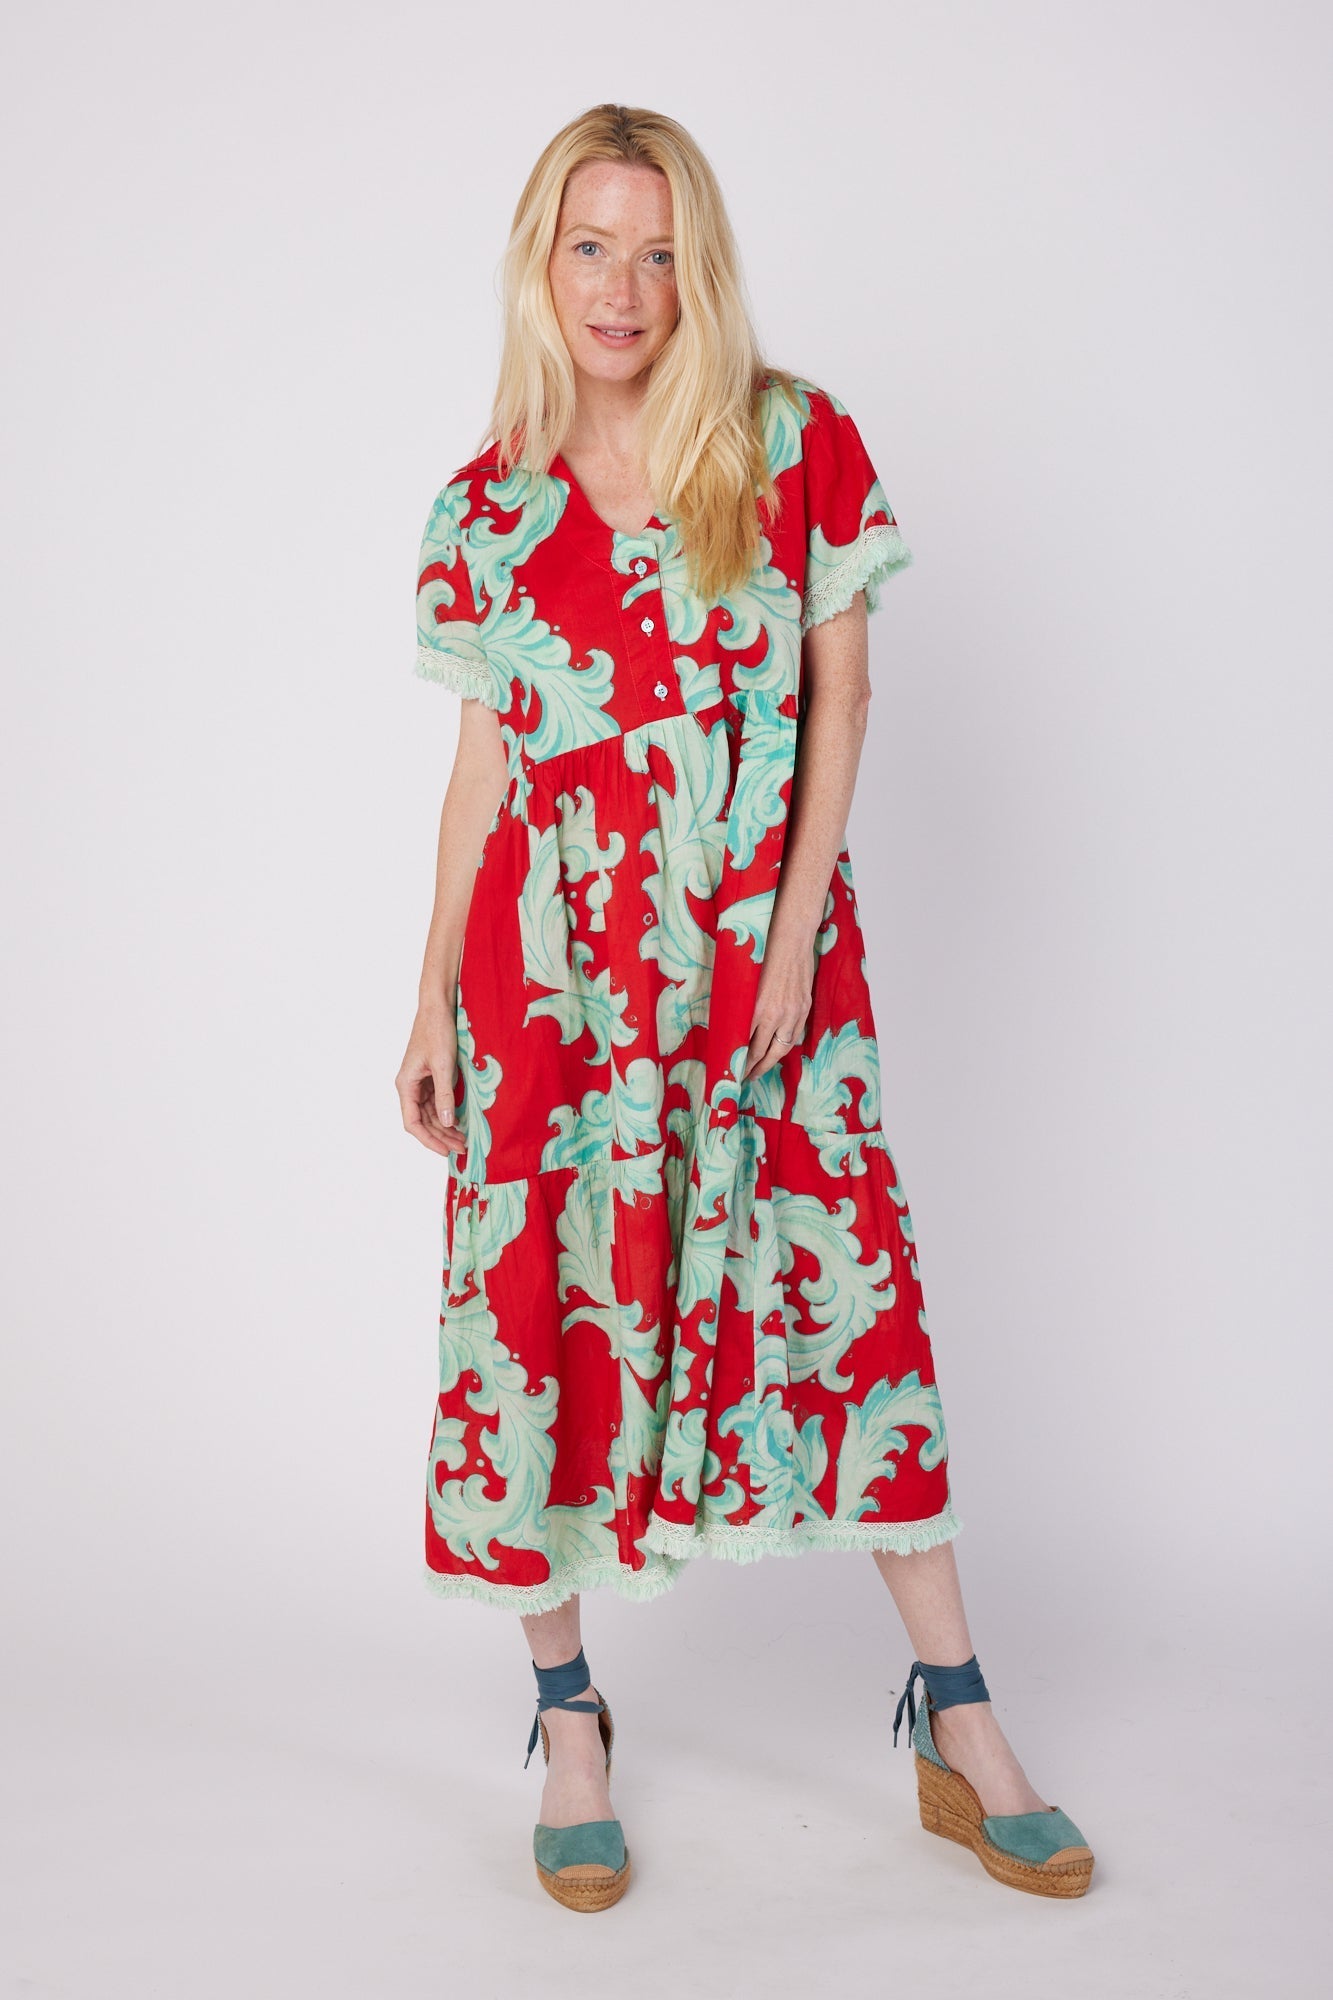 ModaPosa Cadenza Short Sleeve Midi Dress with Collar and Fringe Trim in Crimson Mist Baroque . Discover women's resort dresses and lifestyle clothing inspired by the Mediterranean. Free worldwide shipping available!